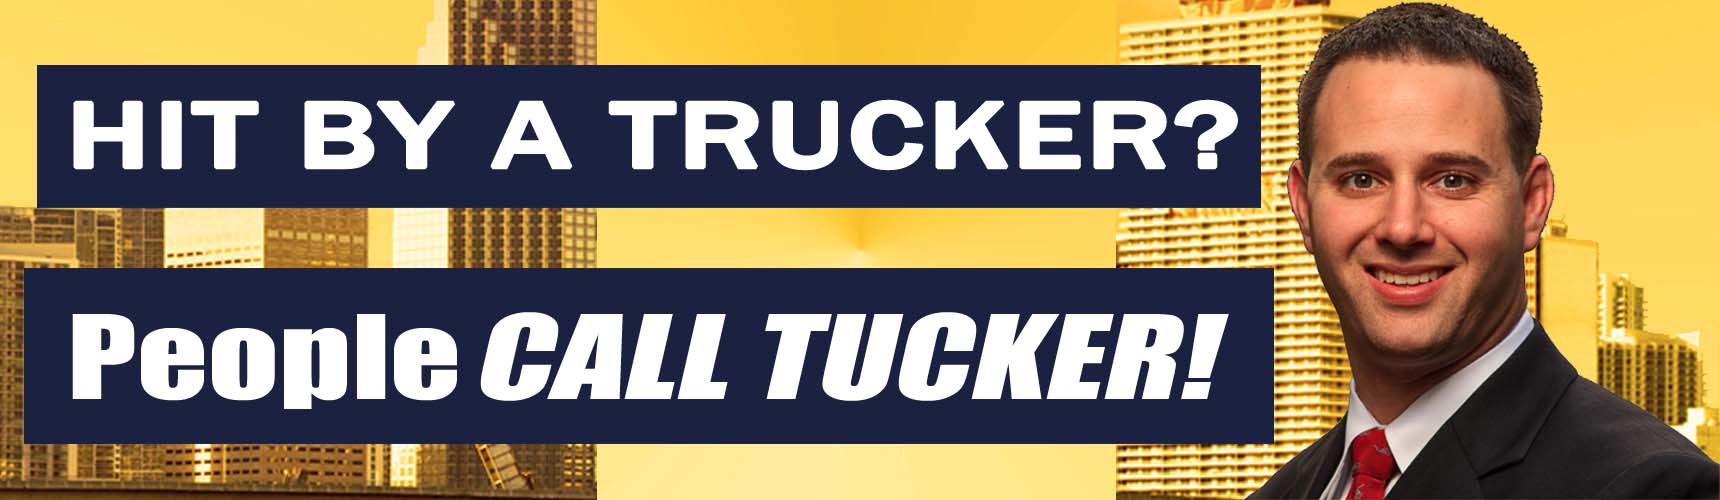 Hit by a Trucker, People Call Tucker